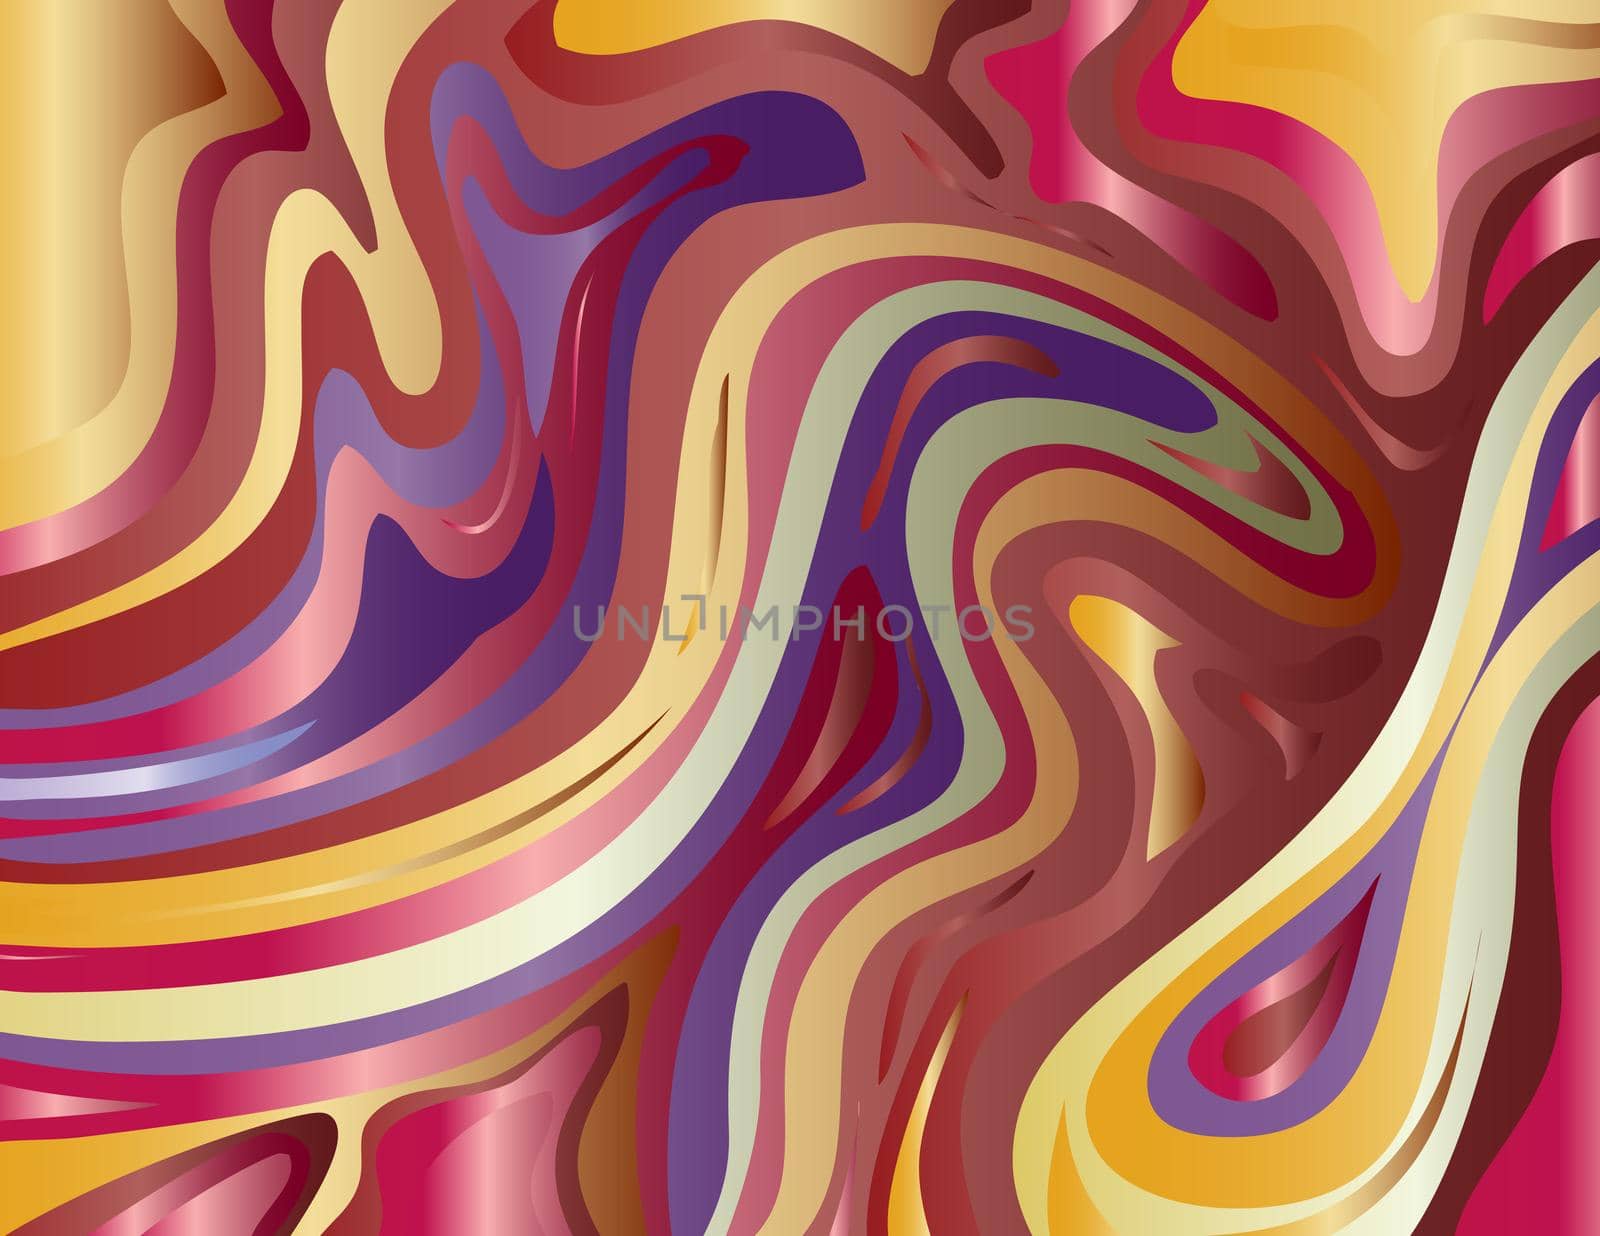 Digital marbling or inkscape illustration of an abstract swirling psychedelic liquid marble simulated marbling in Suminagashi Kintsugi marbled effect style in Burgundy and canary yellow color.
